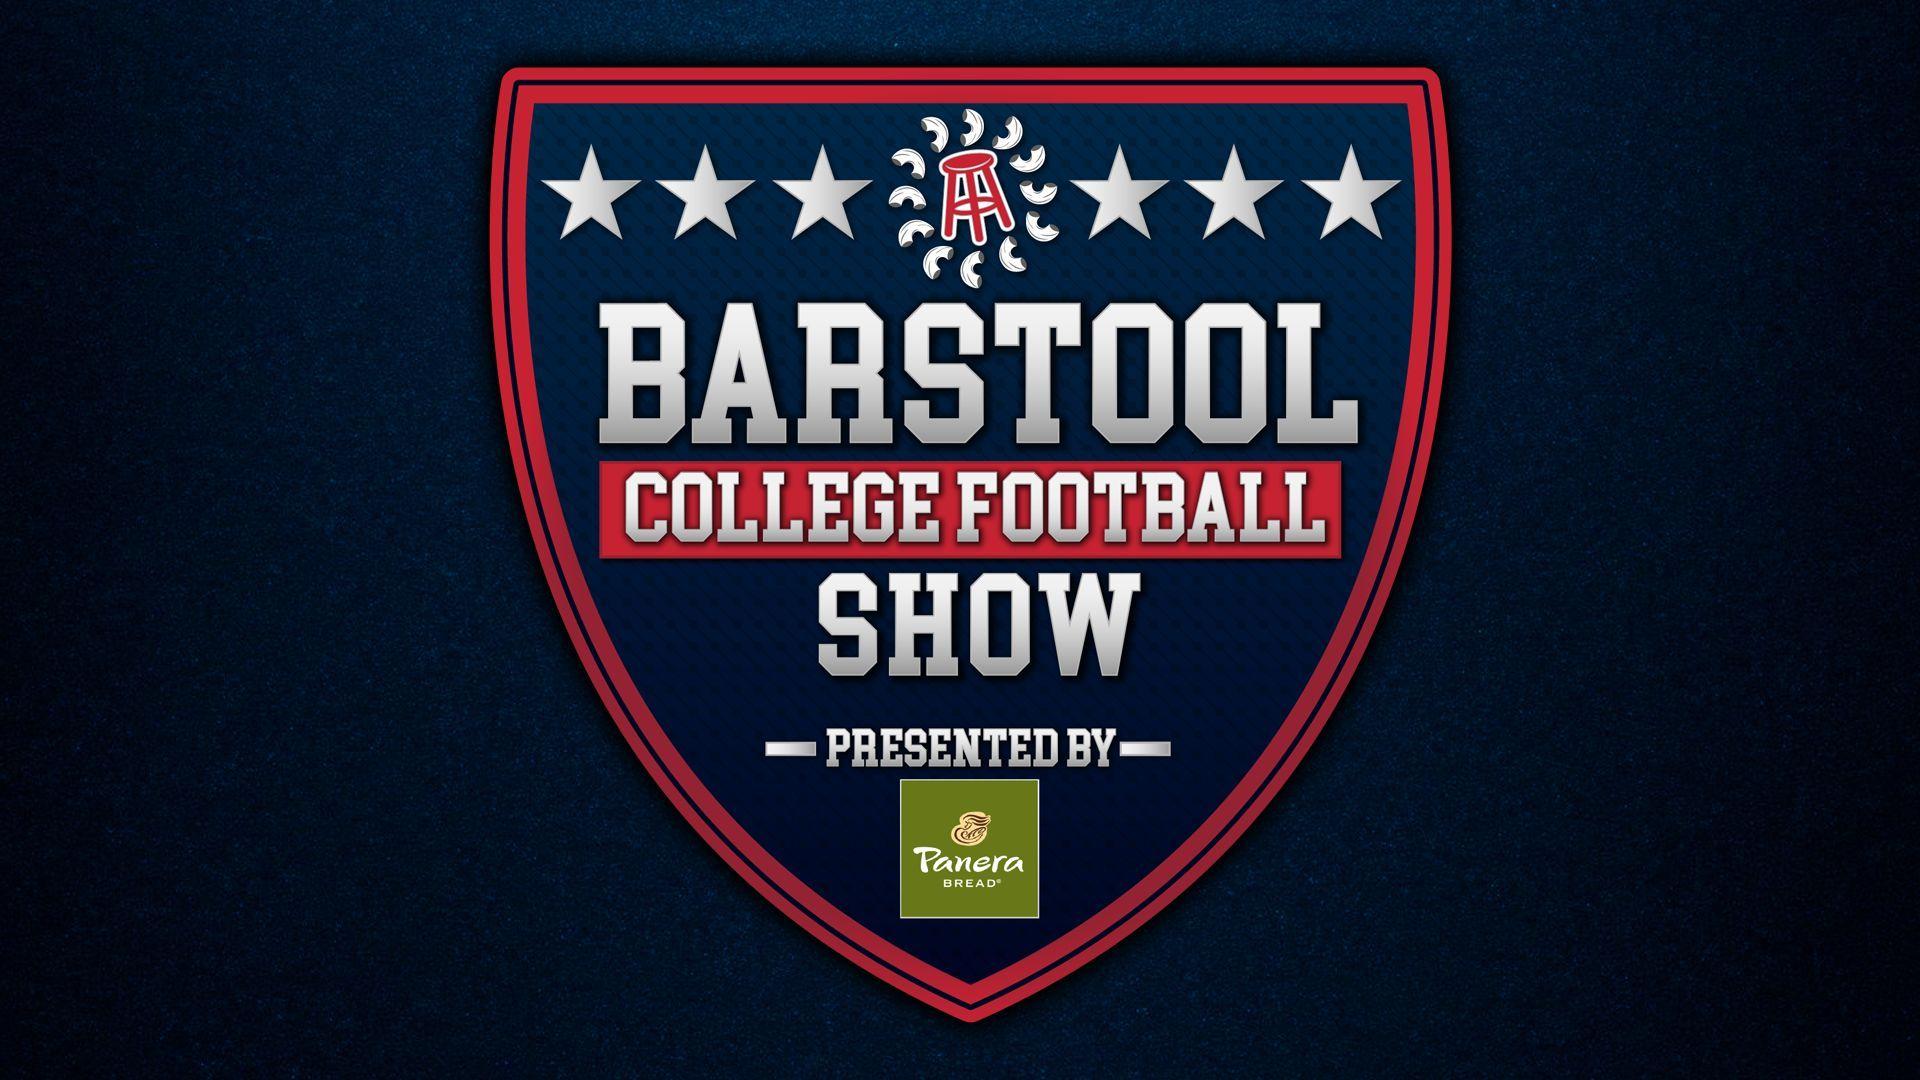 Bcfs Logo - The Barstool College Football Show Debuts Saturday at 10 AM. Will Be